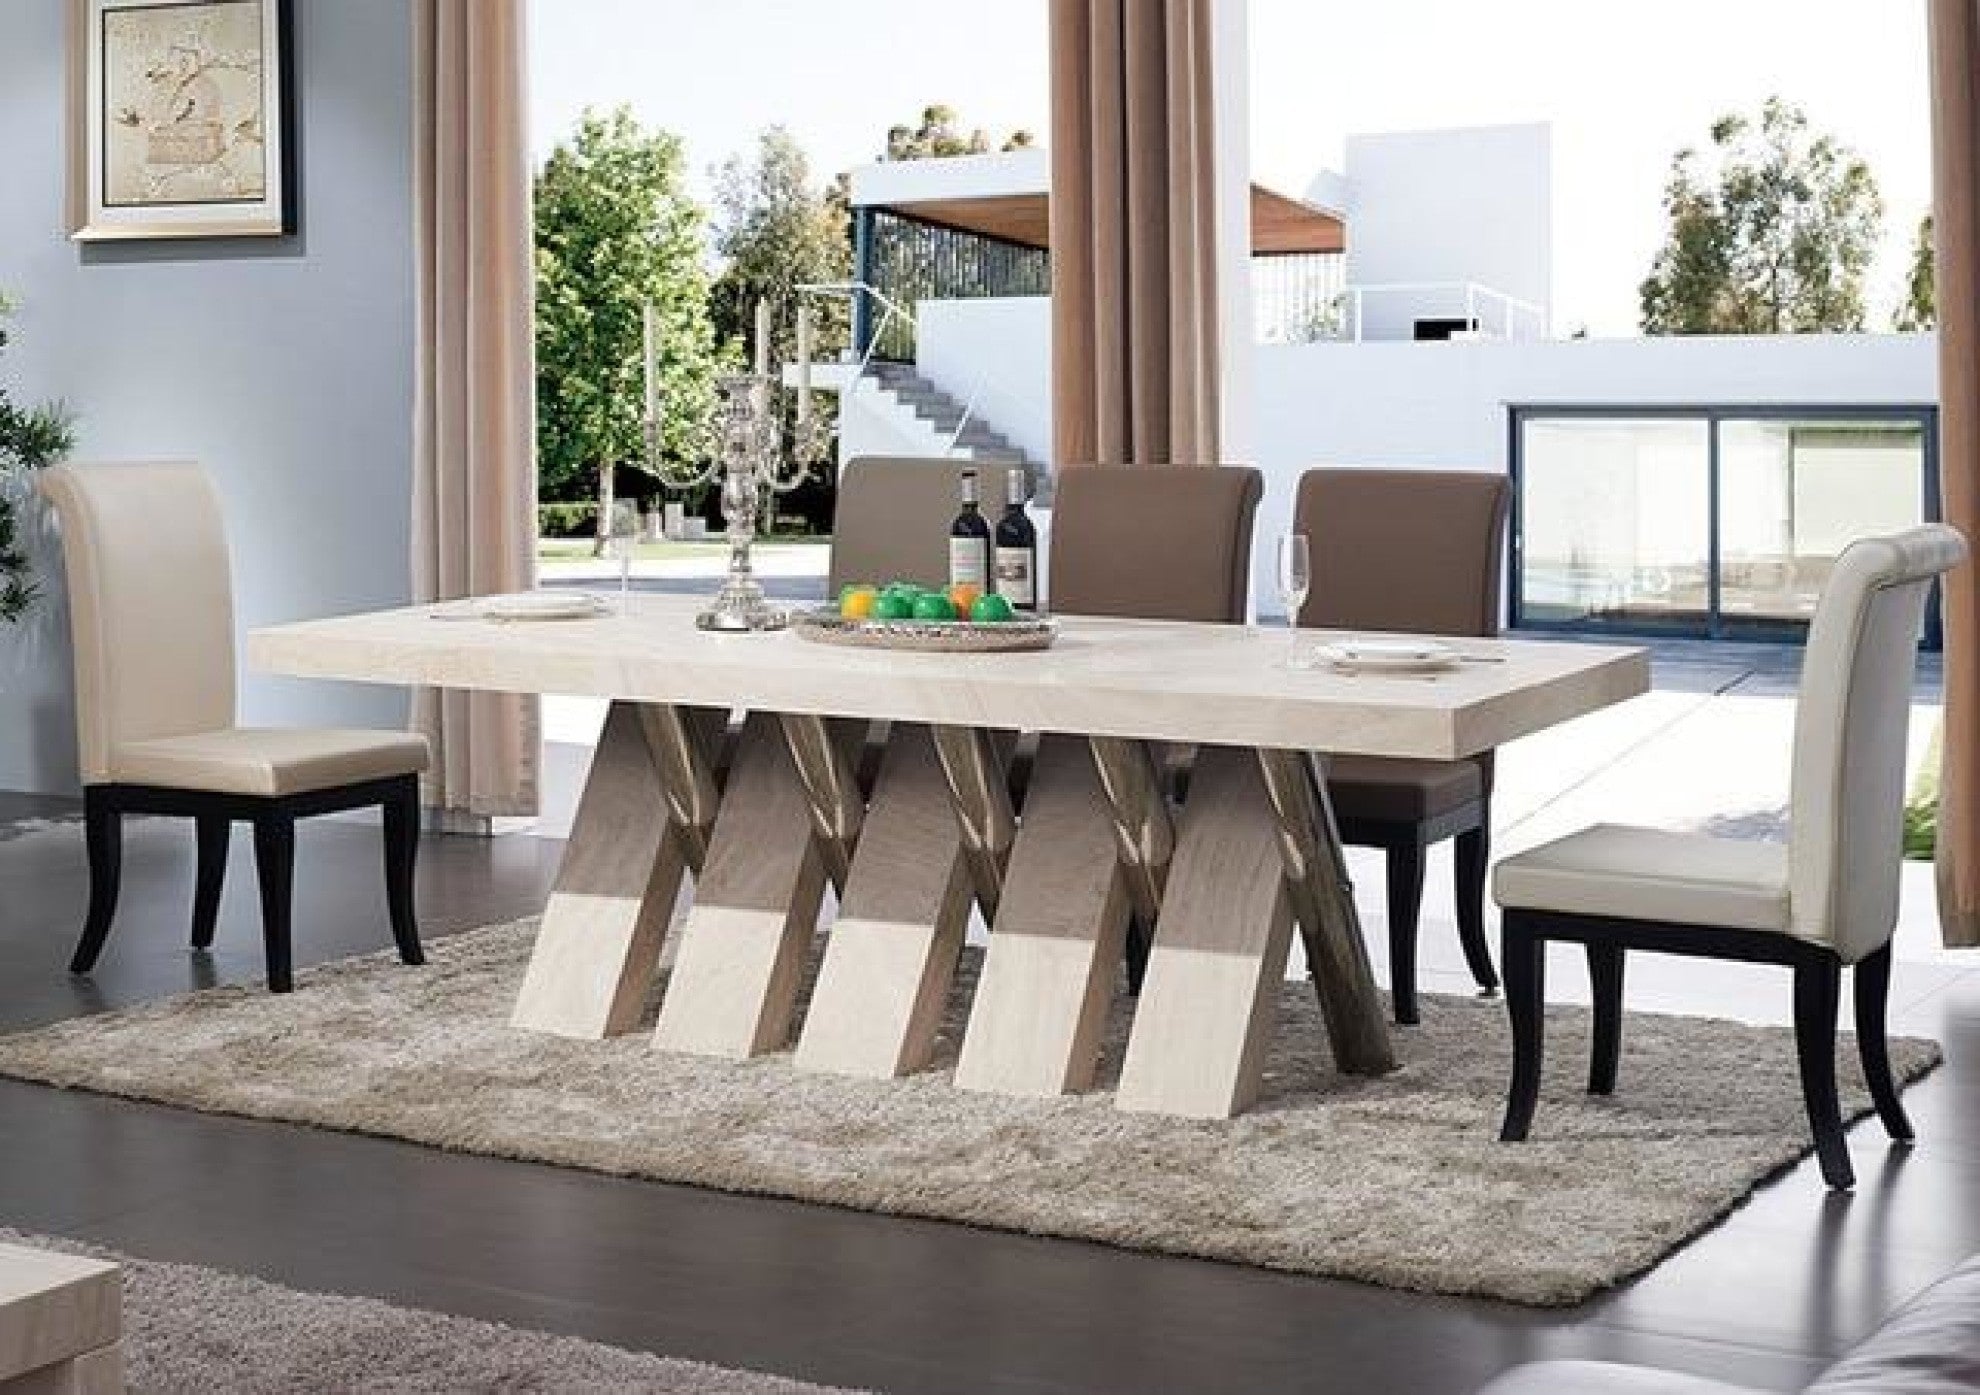 10 Seater Dining Room Table And Chairs Deals - Www.Kreis204.De 1693668052